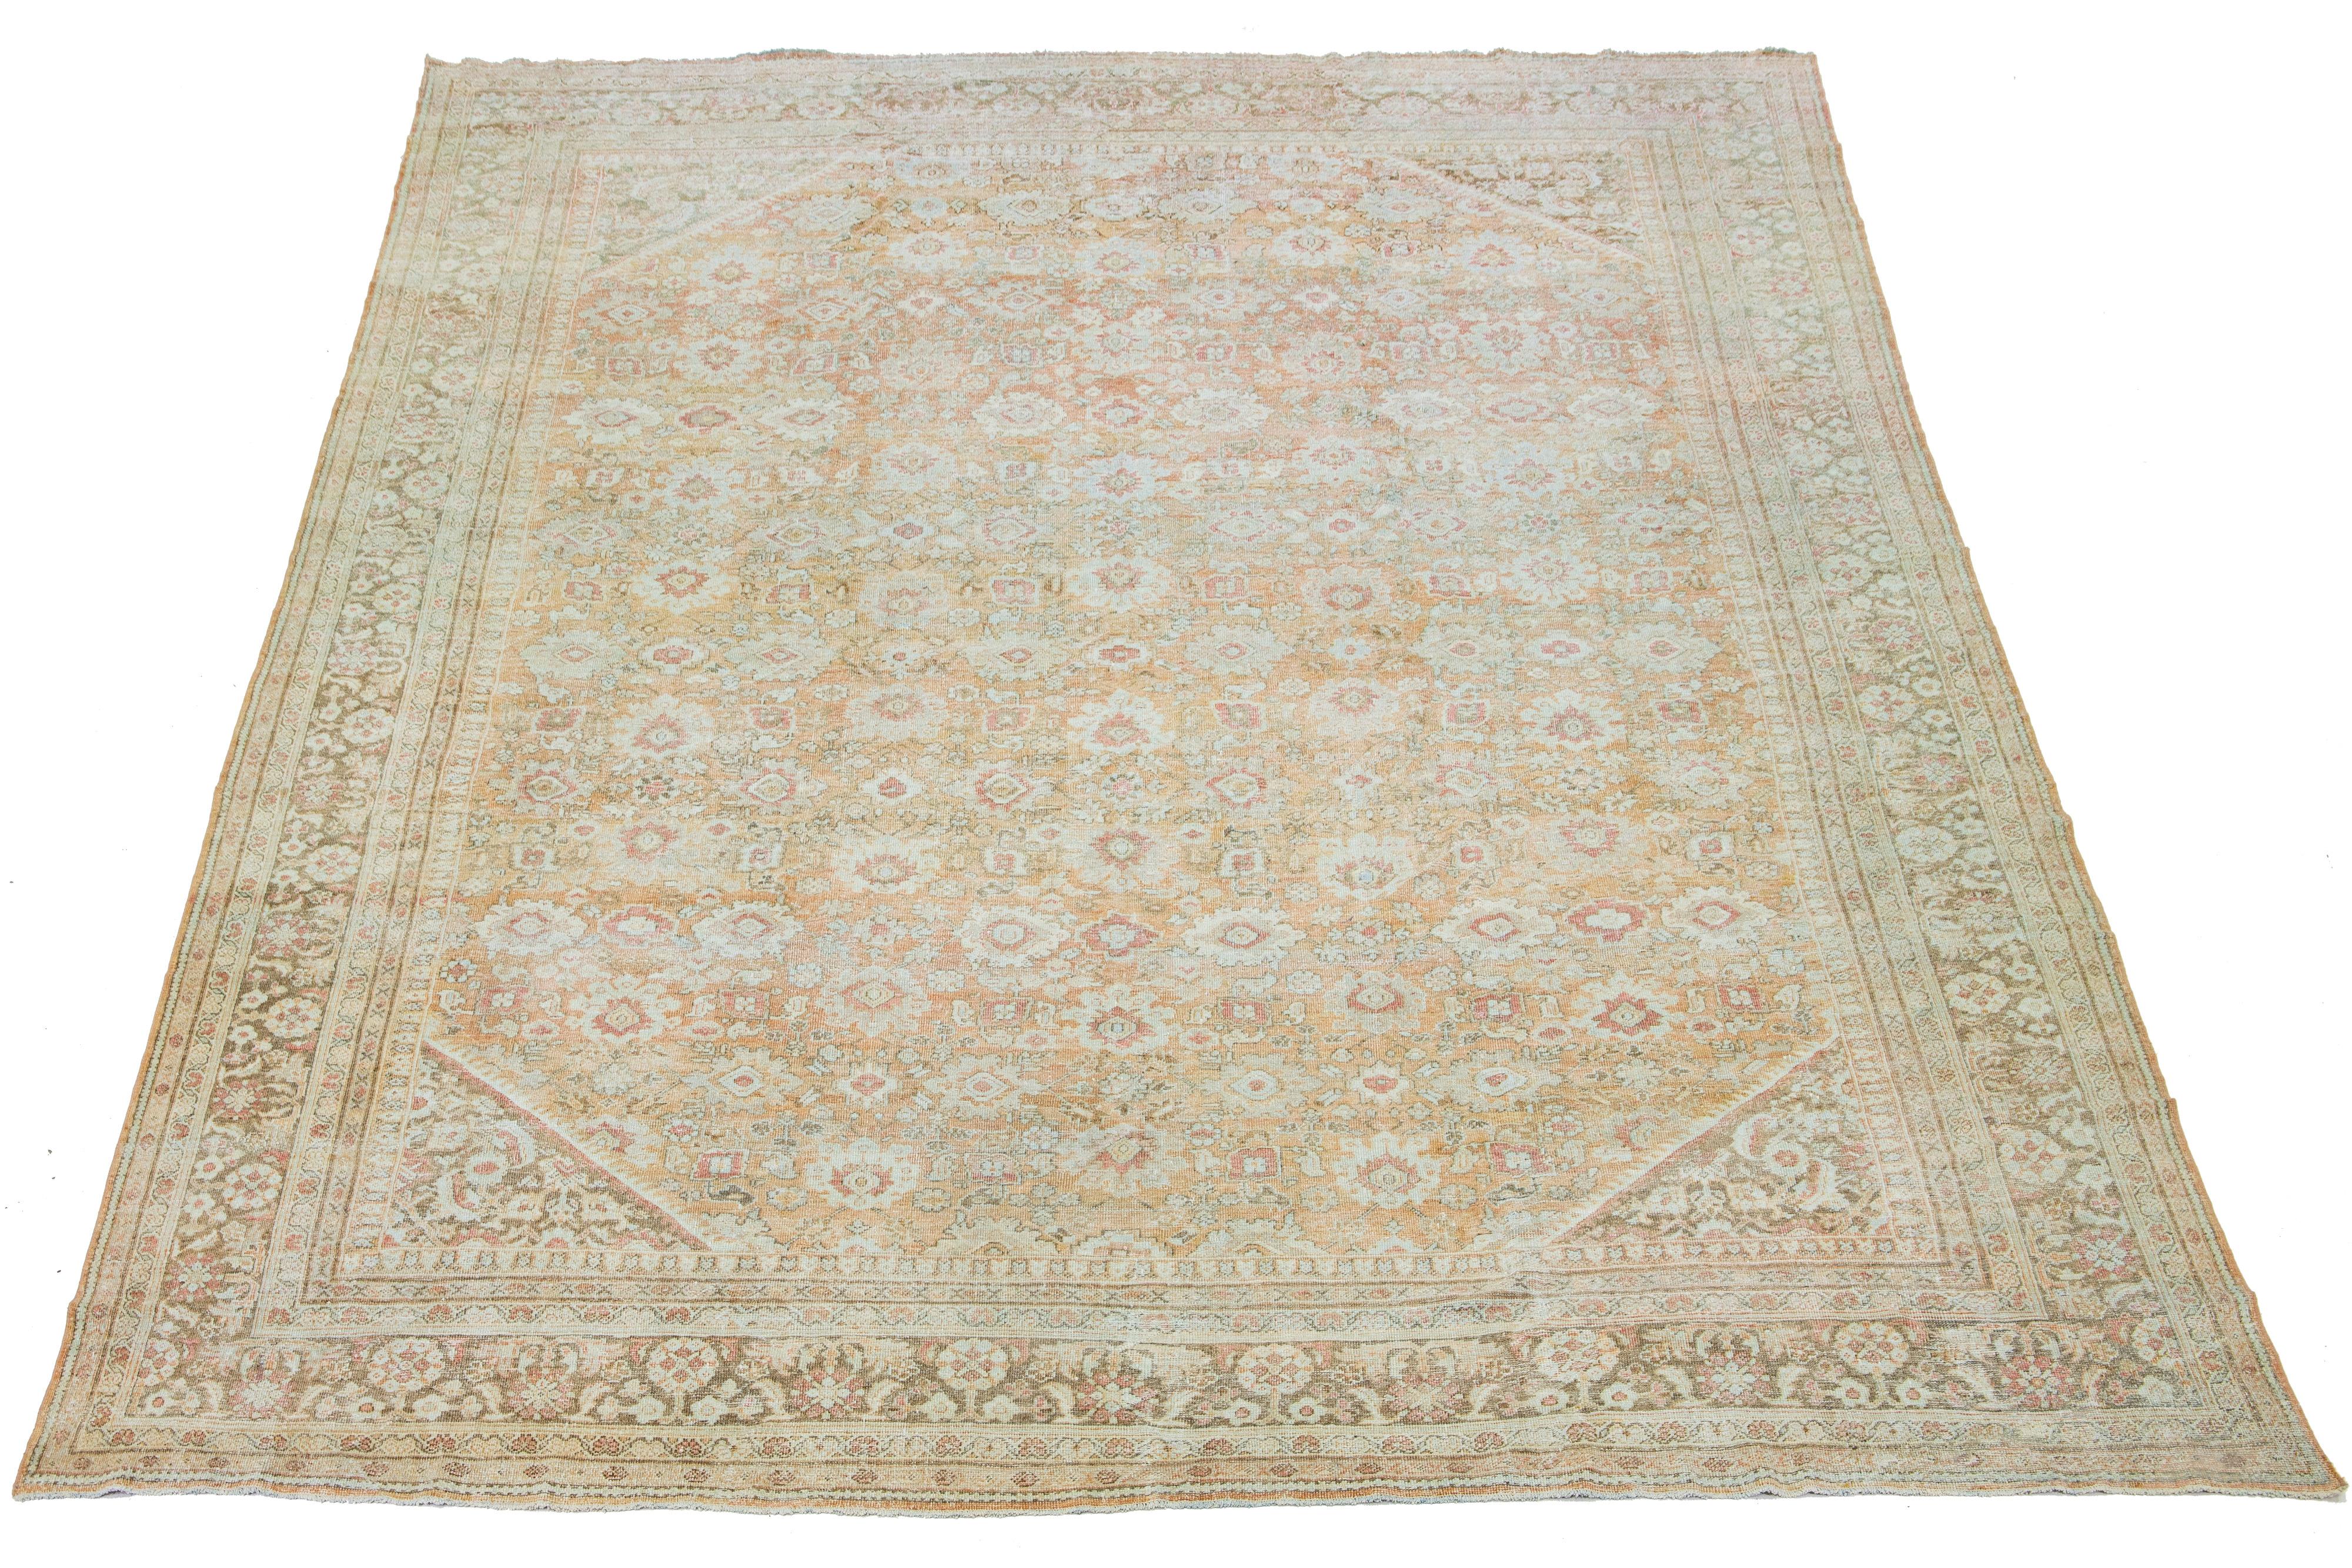 Beautiful vintage hand-knotted Mahal wool rug with an orange-peach field. It features blue, red, and ivory accents in an all-over floral design.

This rug measures 12'4